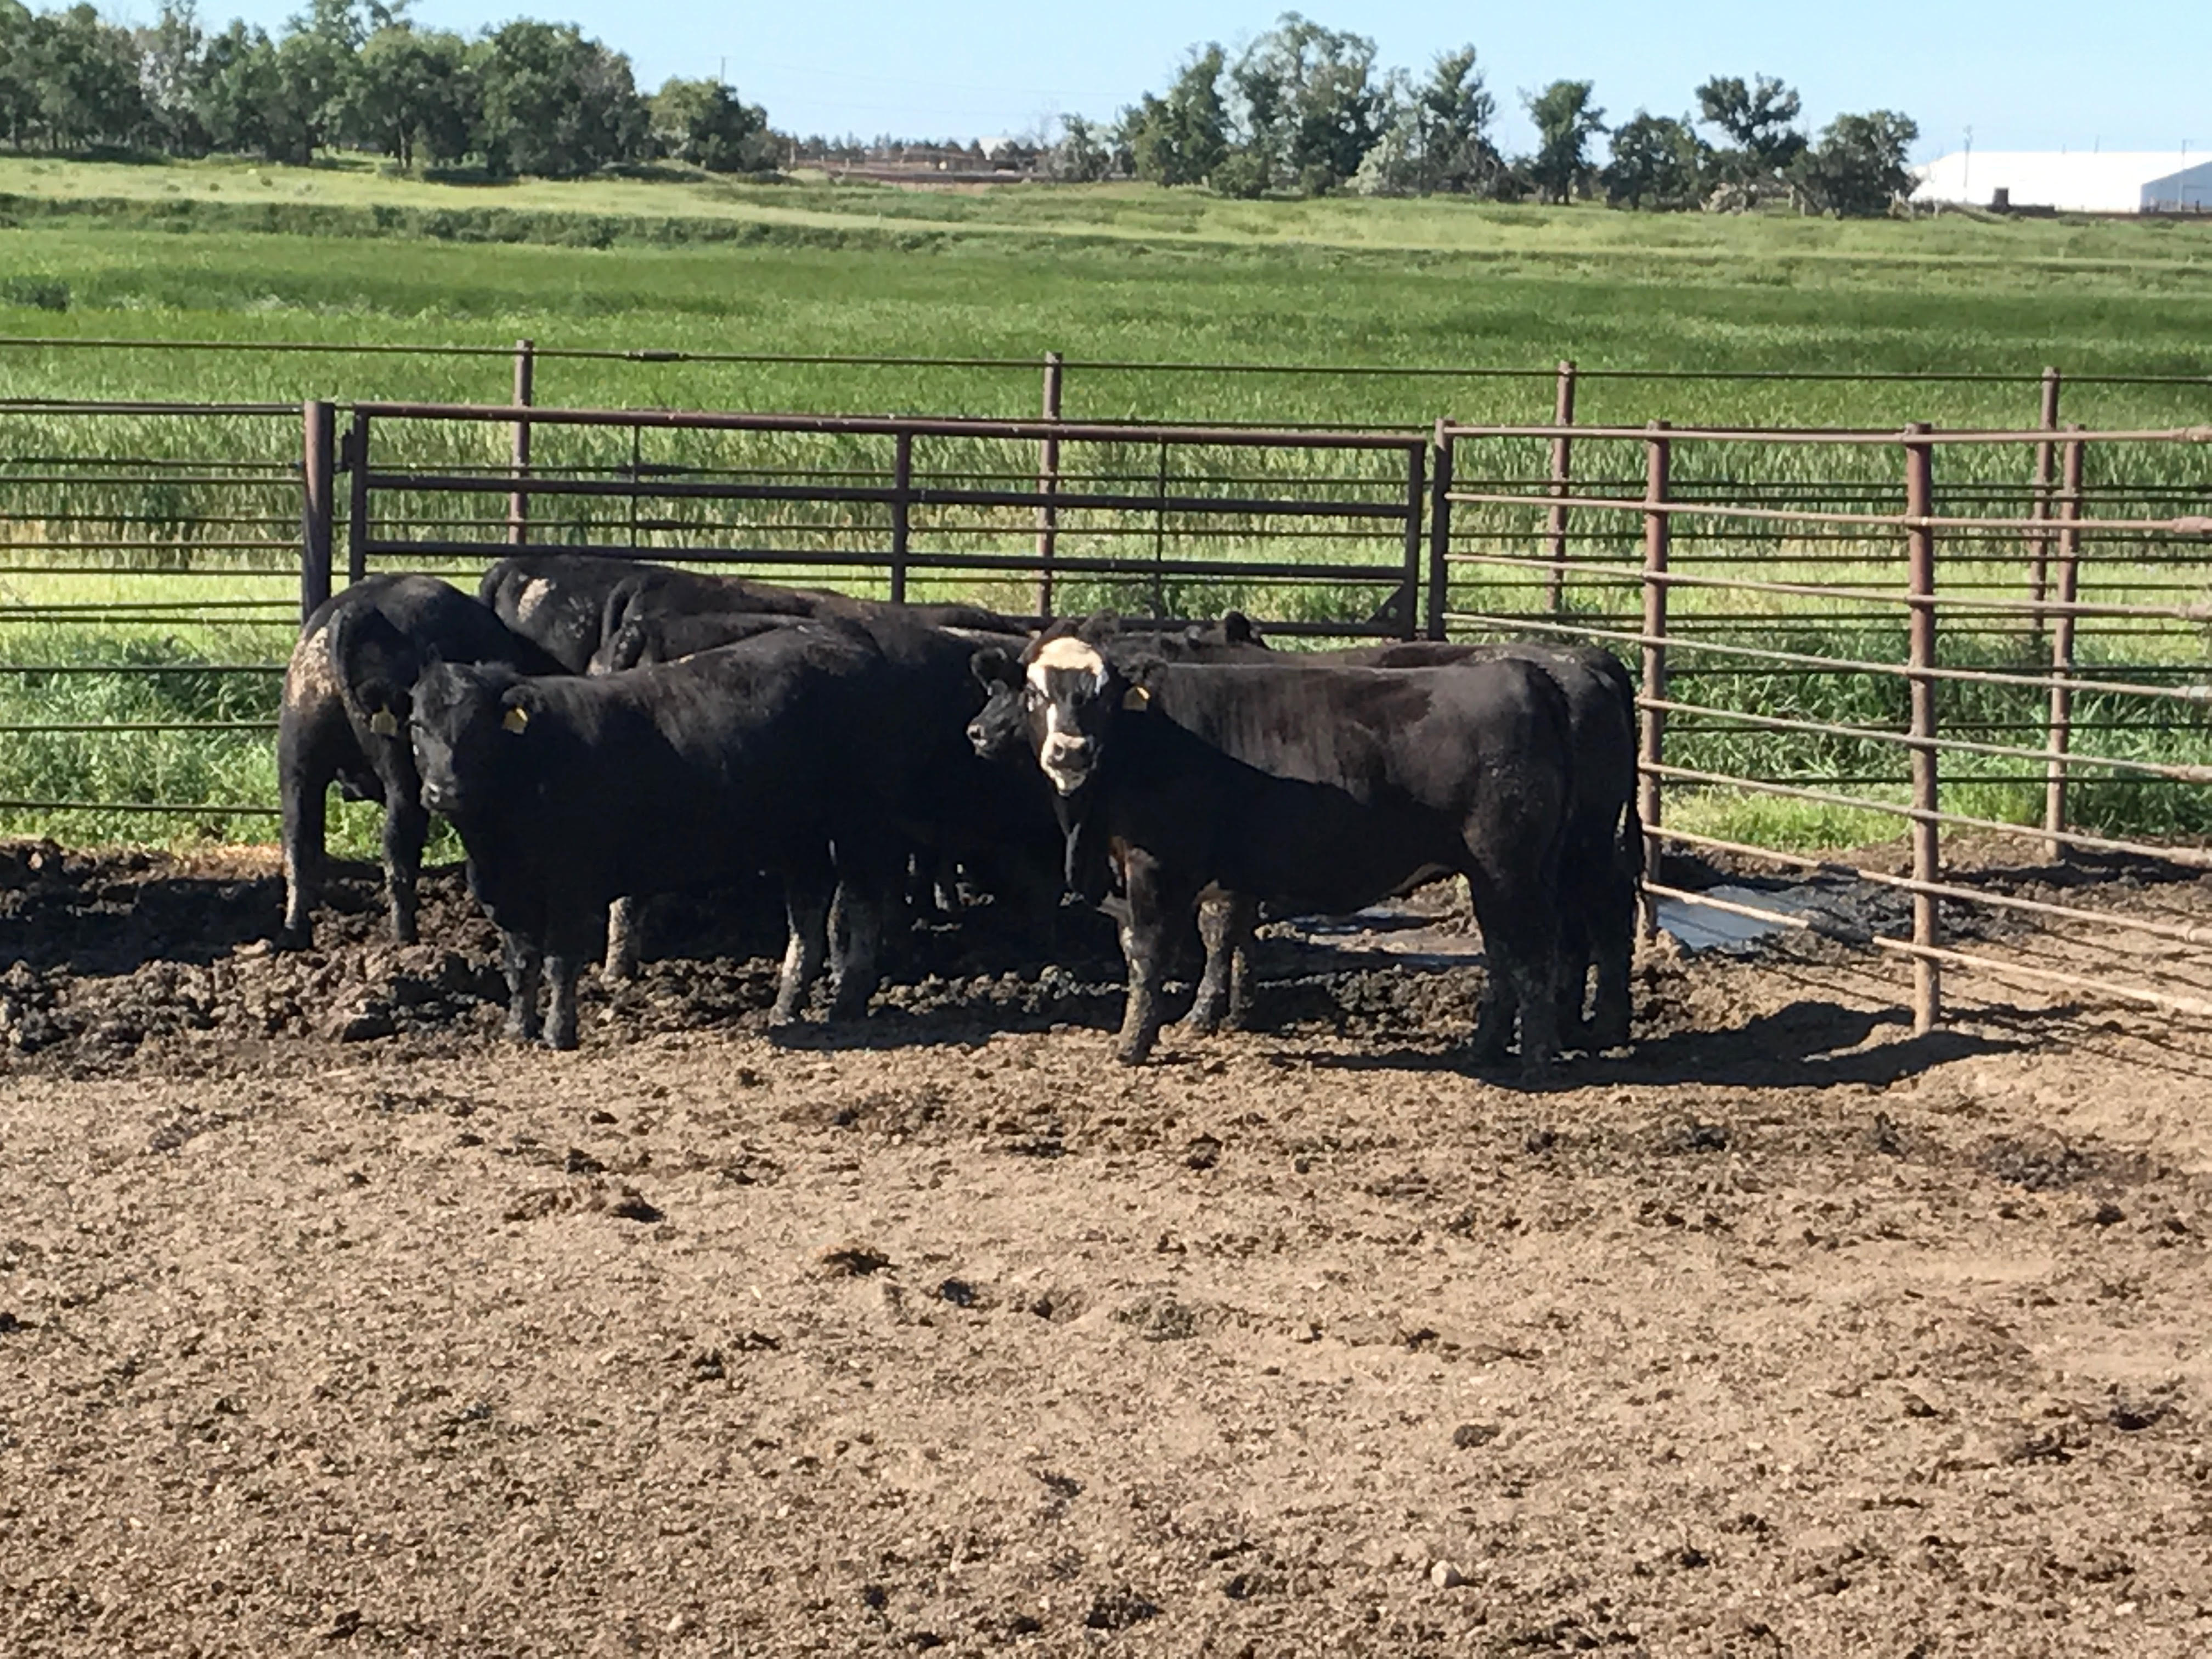 Afternoon Ag News, August 27, 2021: Funds available to help Minnesota ranchers improve their operations